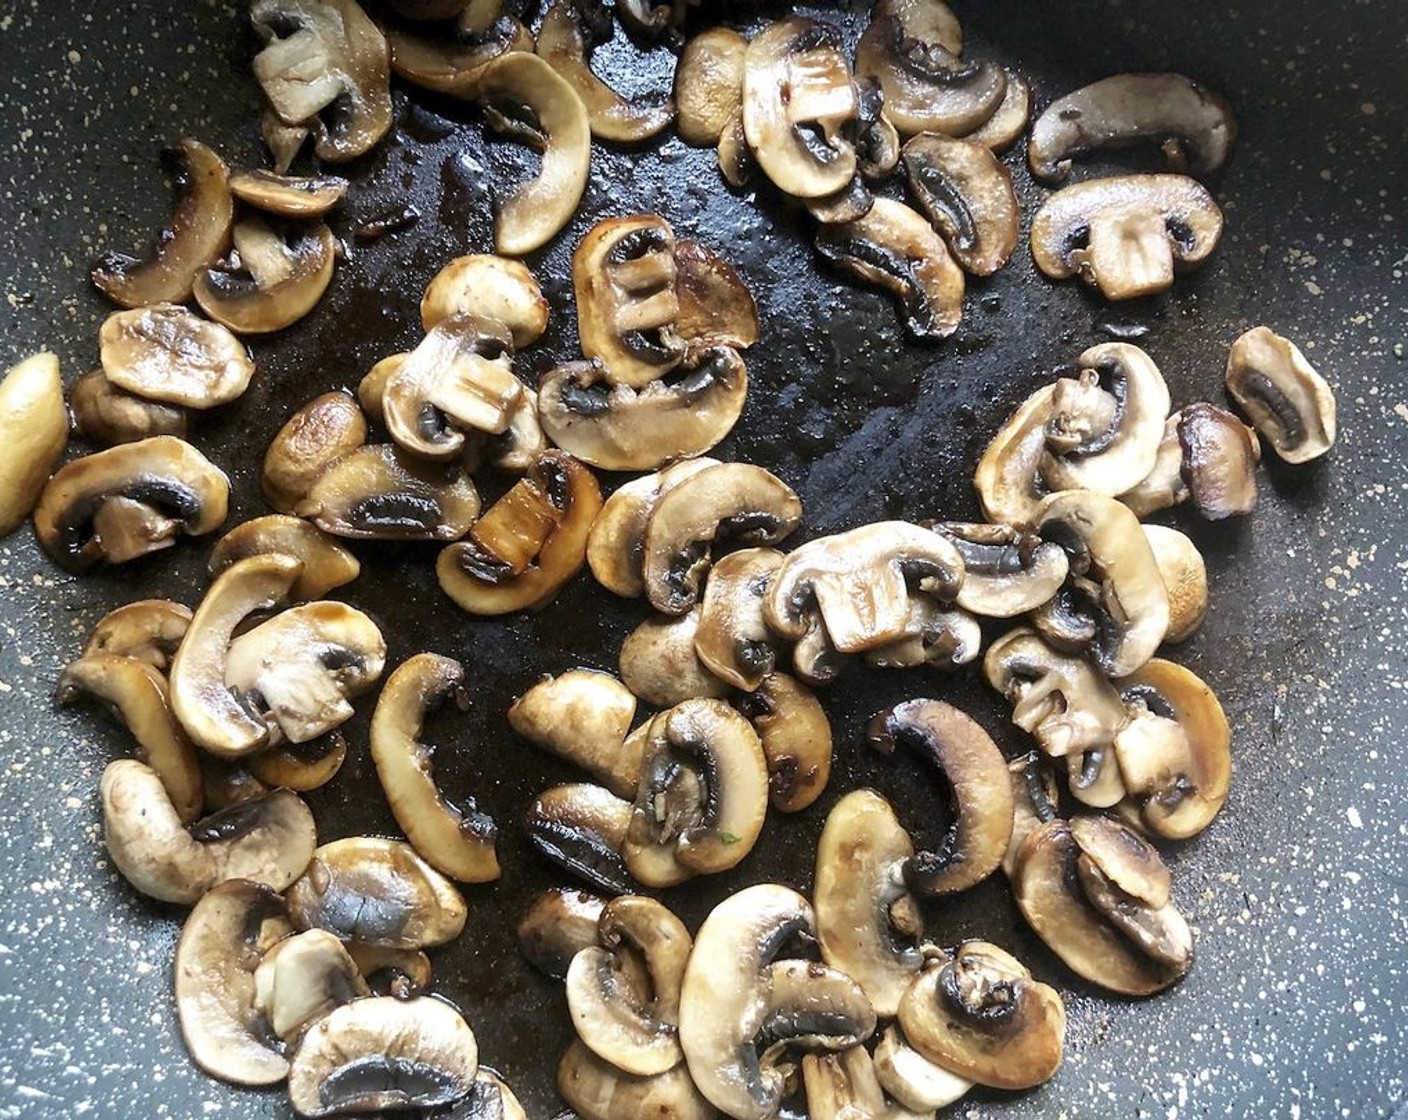 step 5 Heat the remaining Olive Oil (1 Tbsp) in the skillet. Add the Mushrooms (2 1/4 cups) and saute for about 5 minutes. Glaze with the Low-Sodium Soy Sauce (2 Tbsp) sauce and continue cooking for 1 more minute while stirring to fully glaze. Remove from heat and set aside.